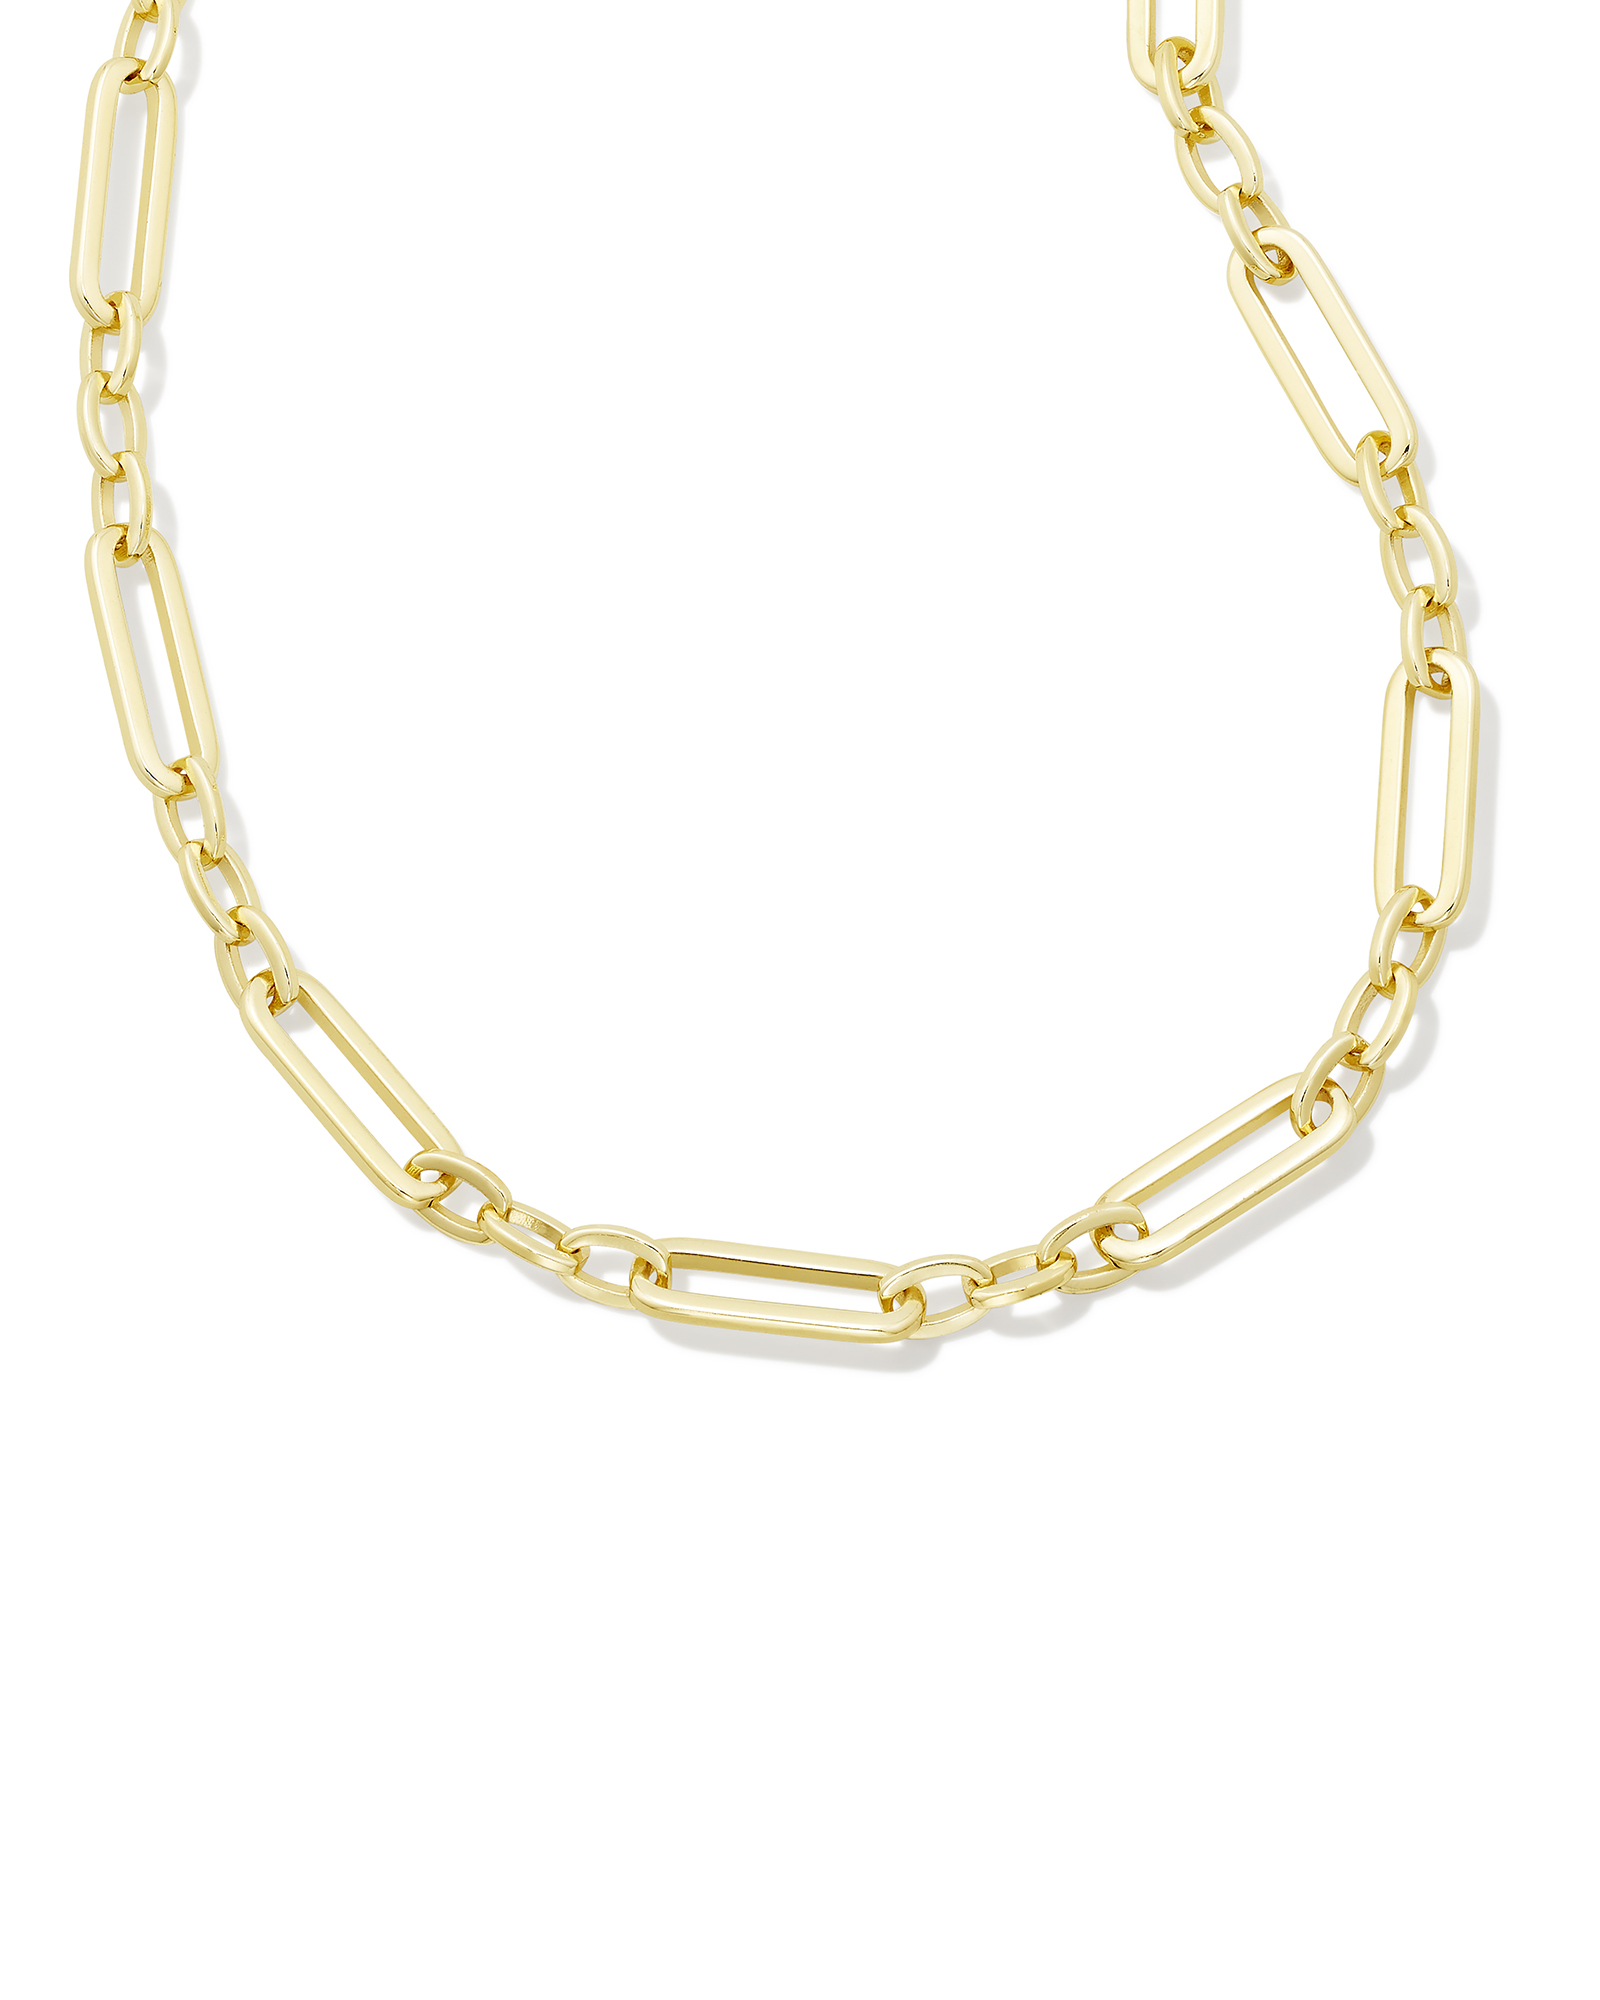 Heather Link and Chain Necklace in Gold | Kendra Scott